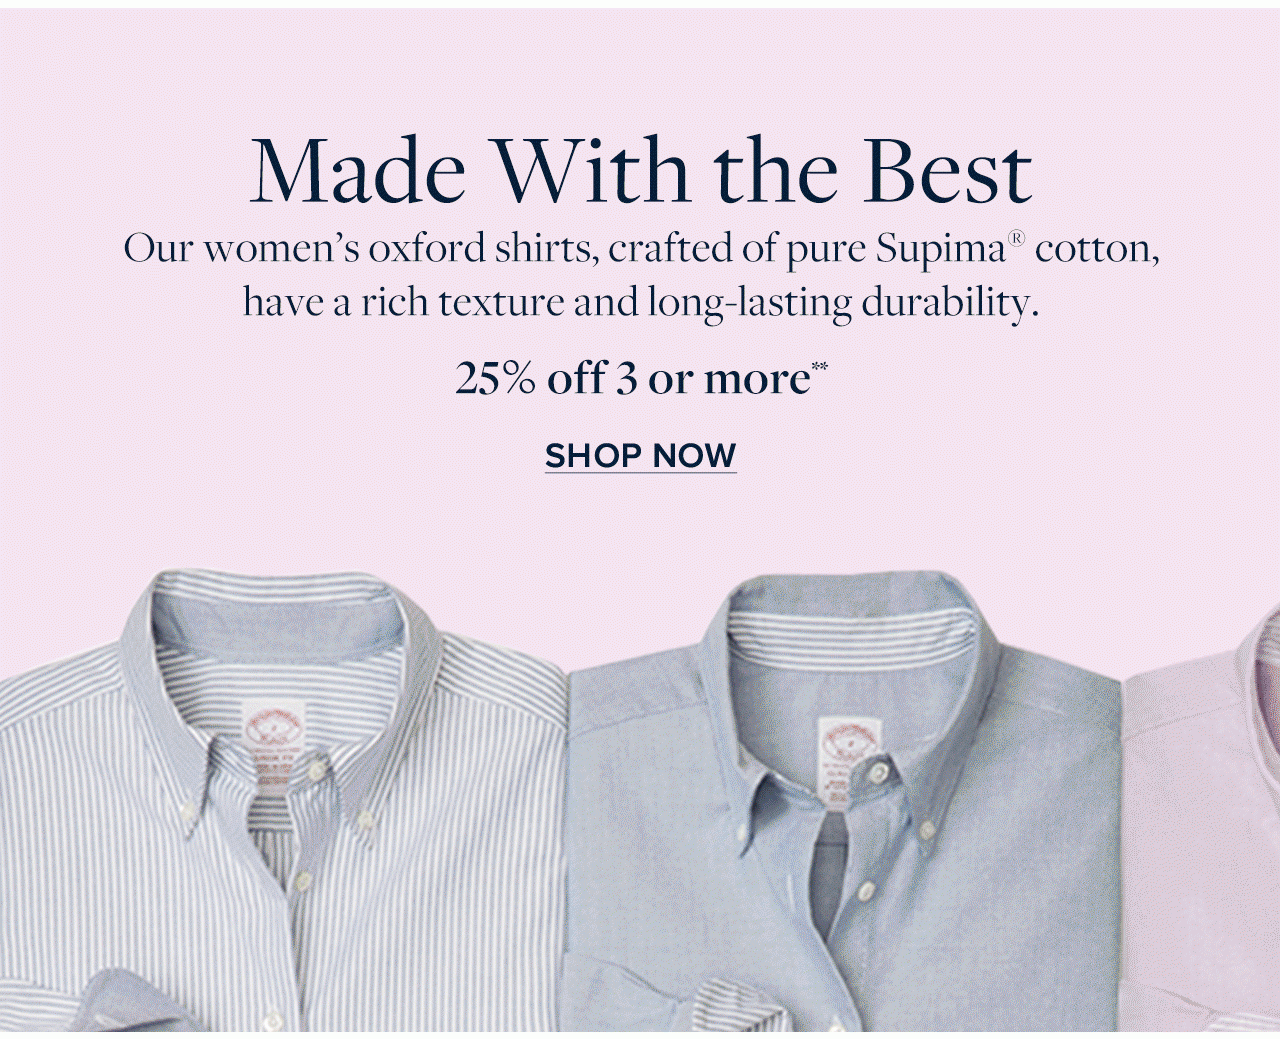 Made With the Best Our women's oxford shirts, crafted of pure Supima cotton, have a rich texture and long-lasting durability 25% off 3 or more Shop Now